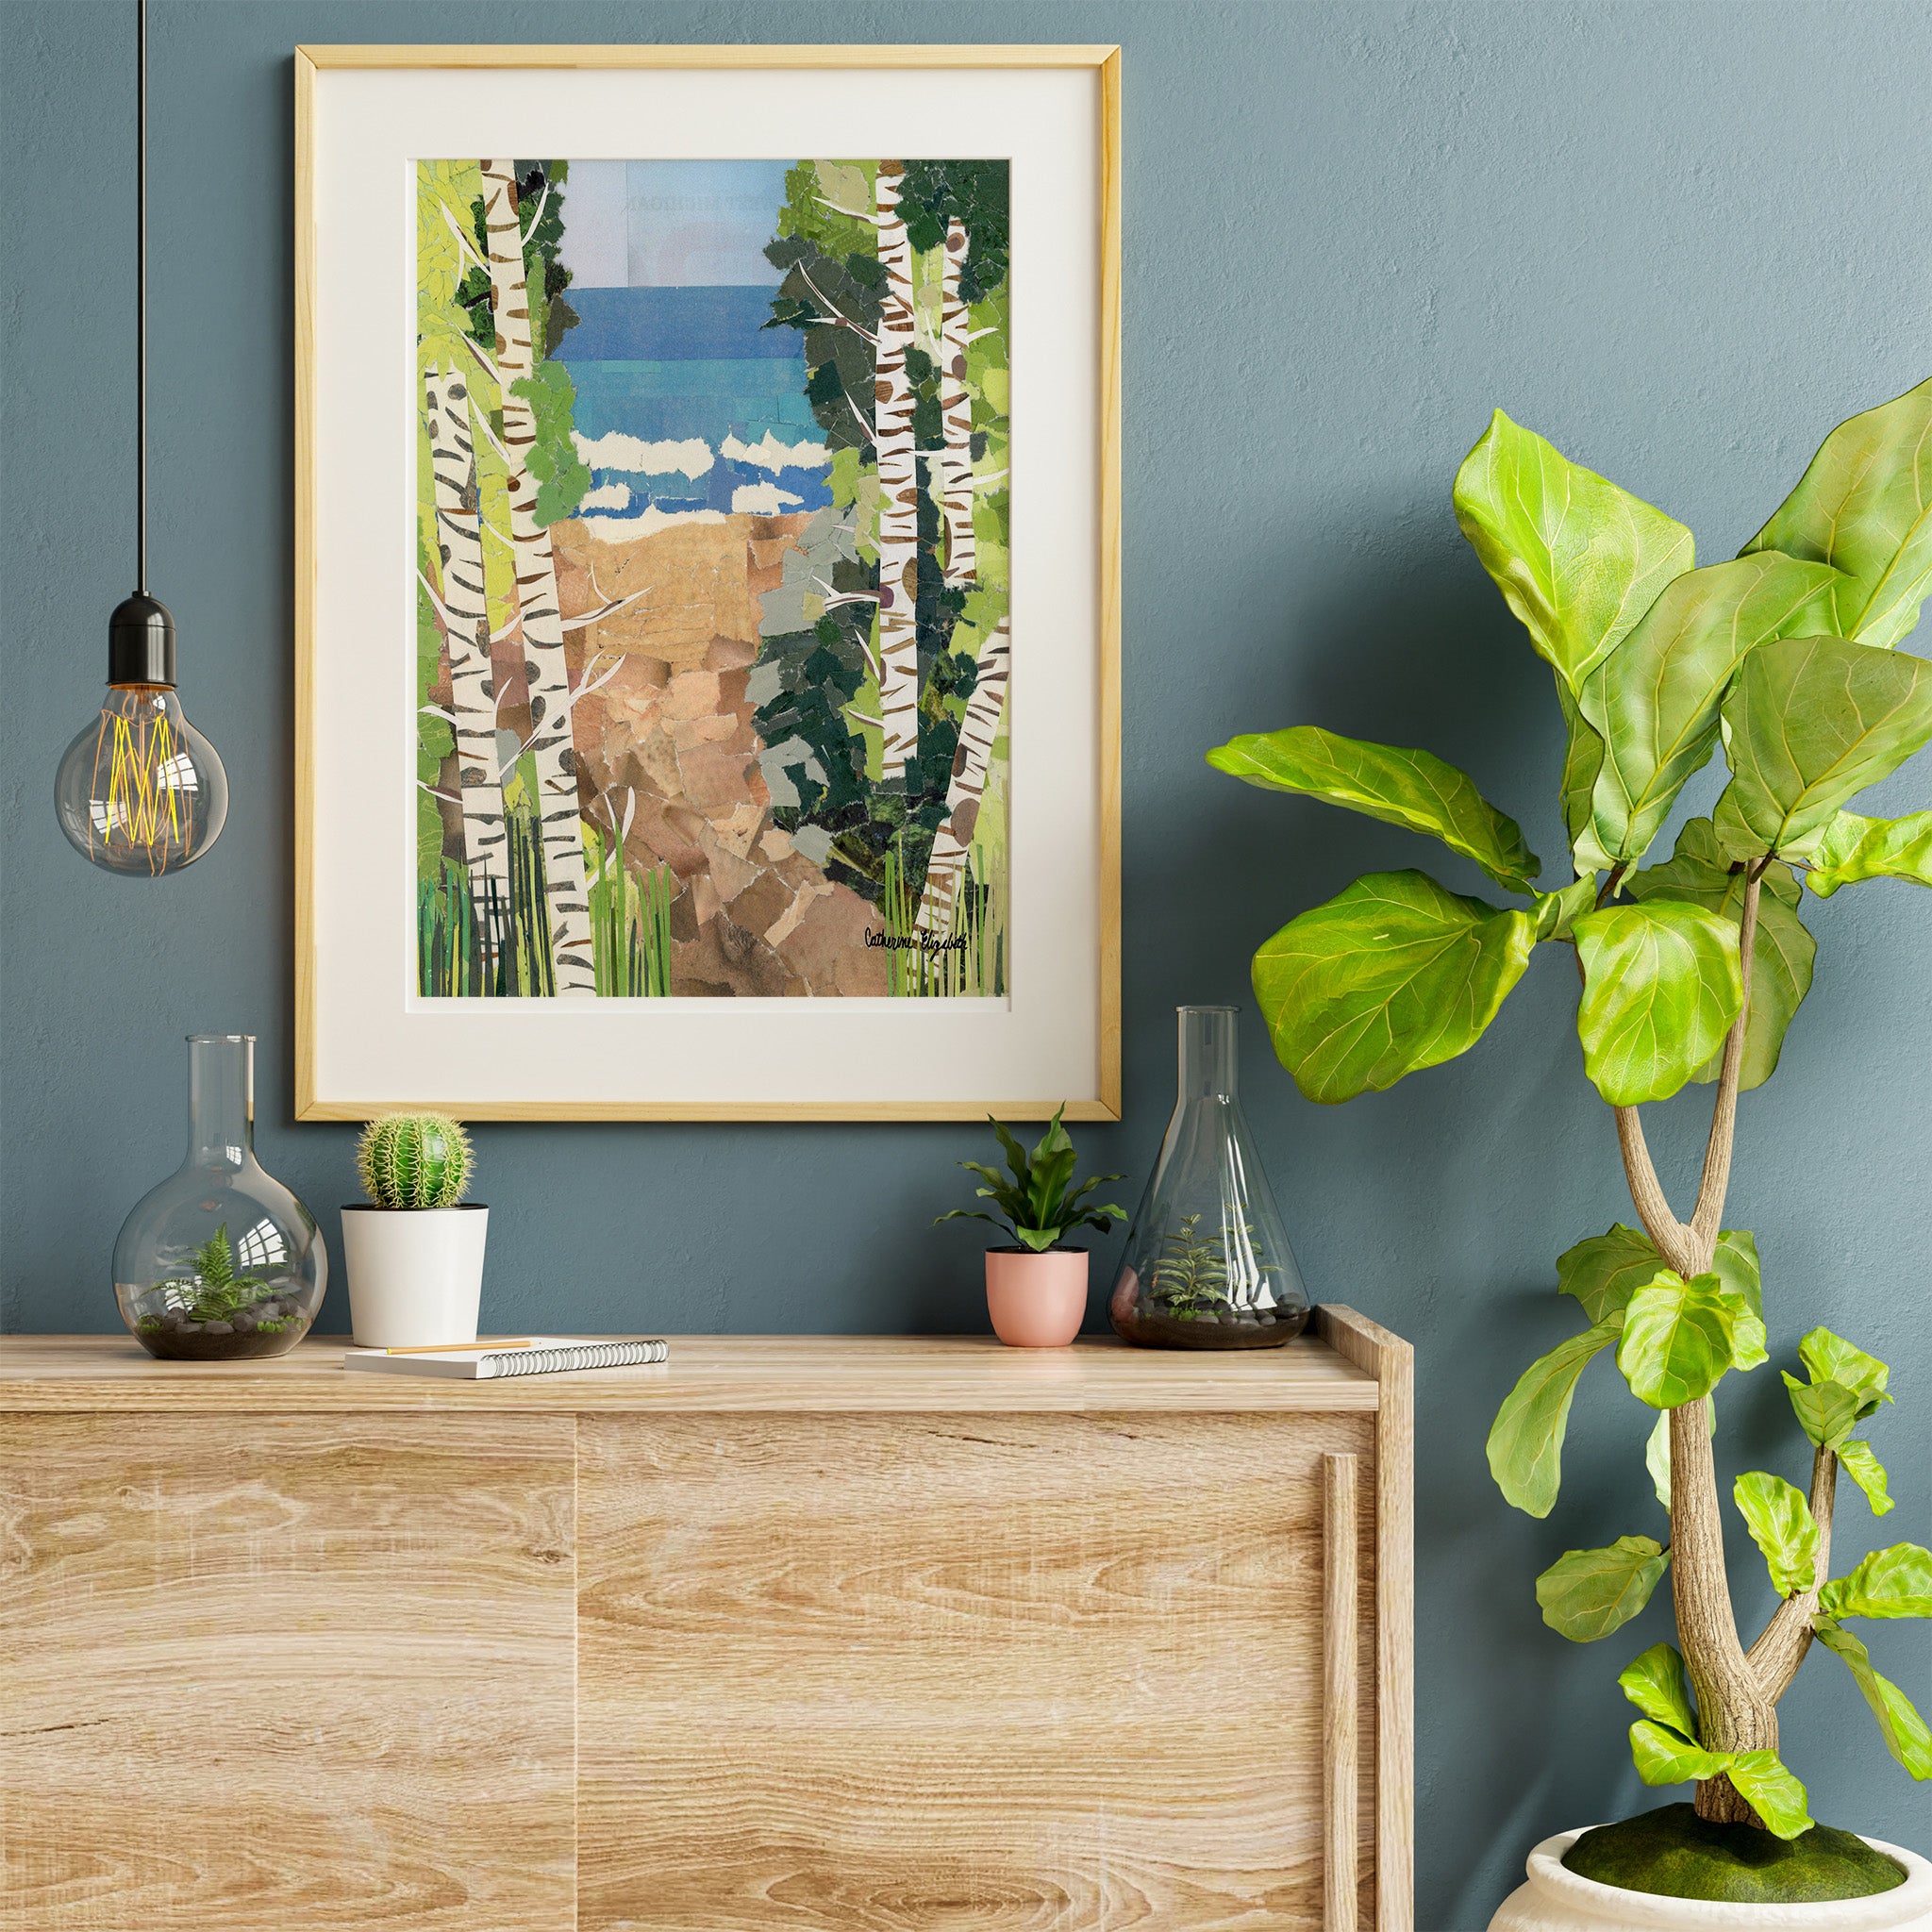 Framing: How to Protect and Preserve Artwork